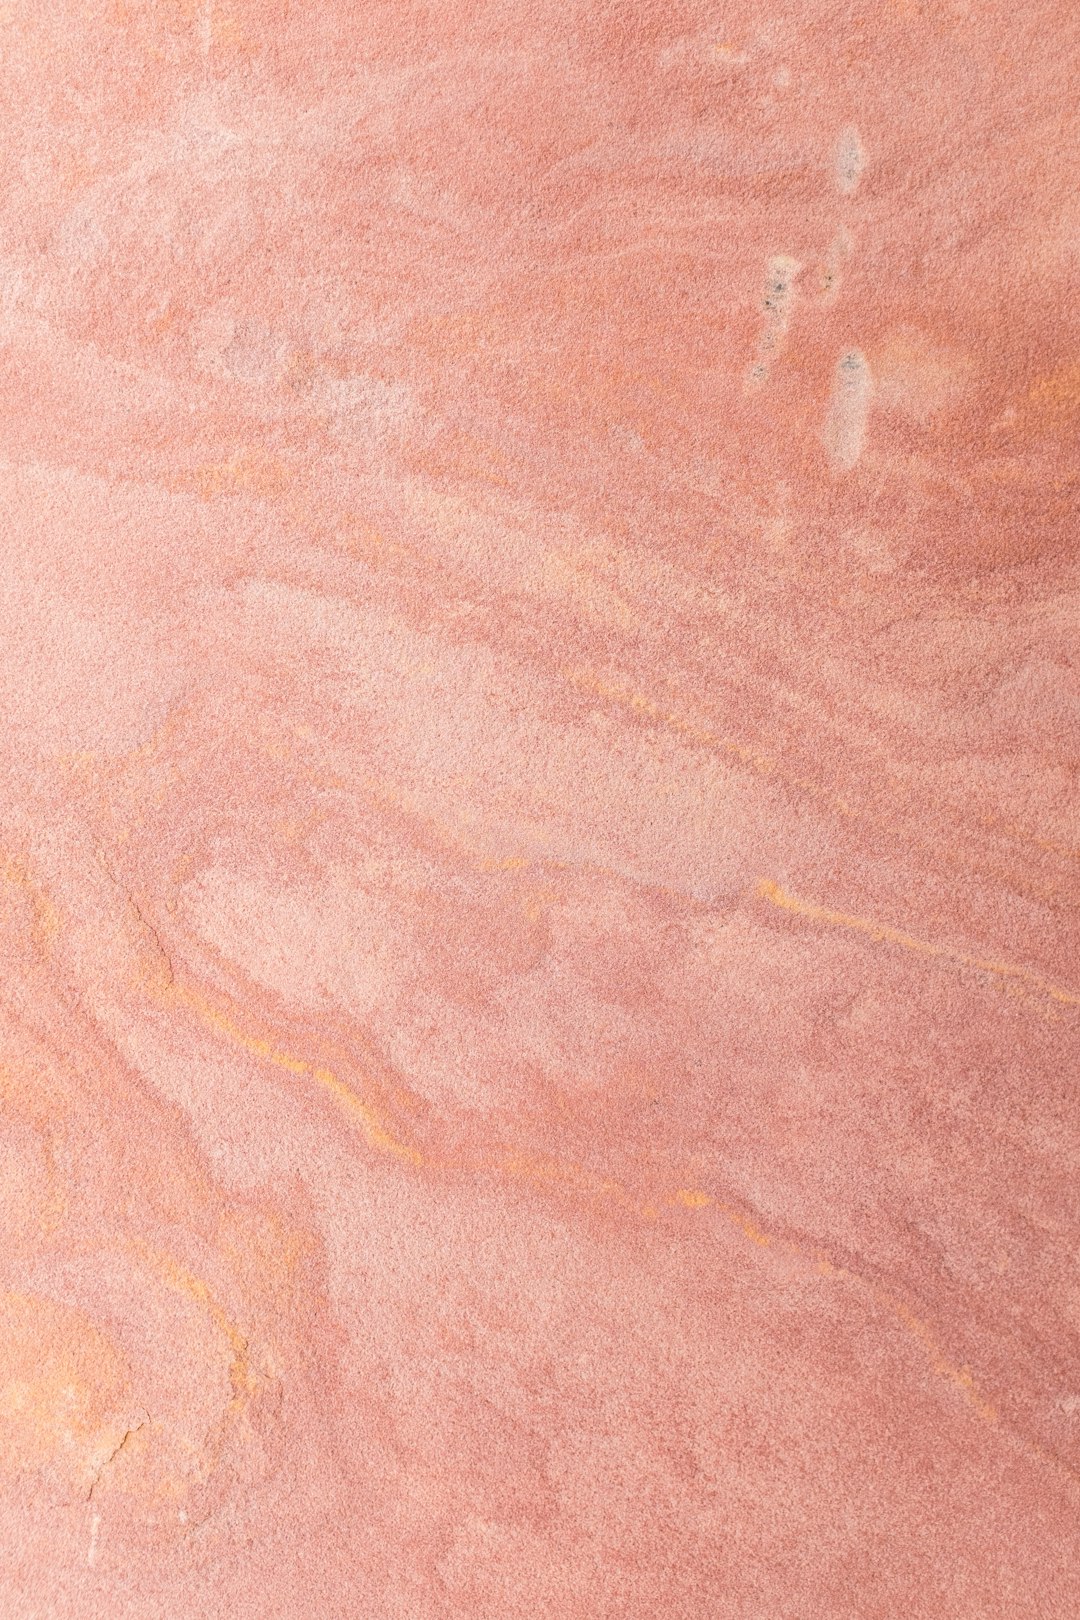 A closeup of the surface texture of pink sandstone, showcasing its unique patterns and colors. The background is plain with no additional elements to highlight the natural beauty of the stone. This photograph was taken by professional photographers using advanced equipment for highly detailed and sharp images. –ar 85:128